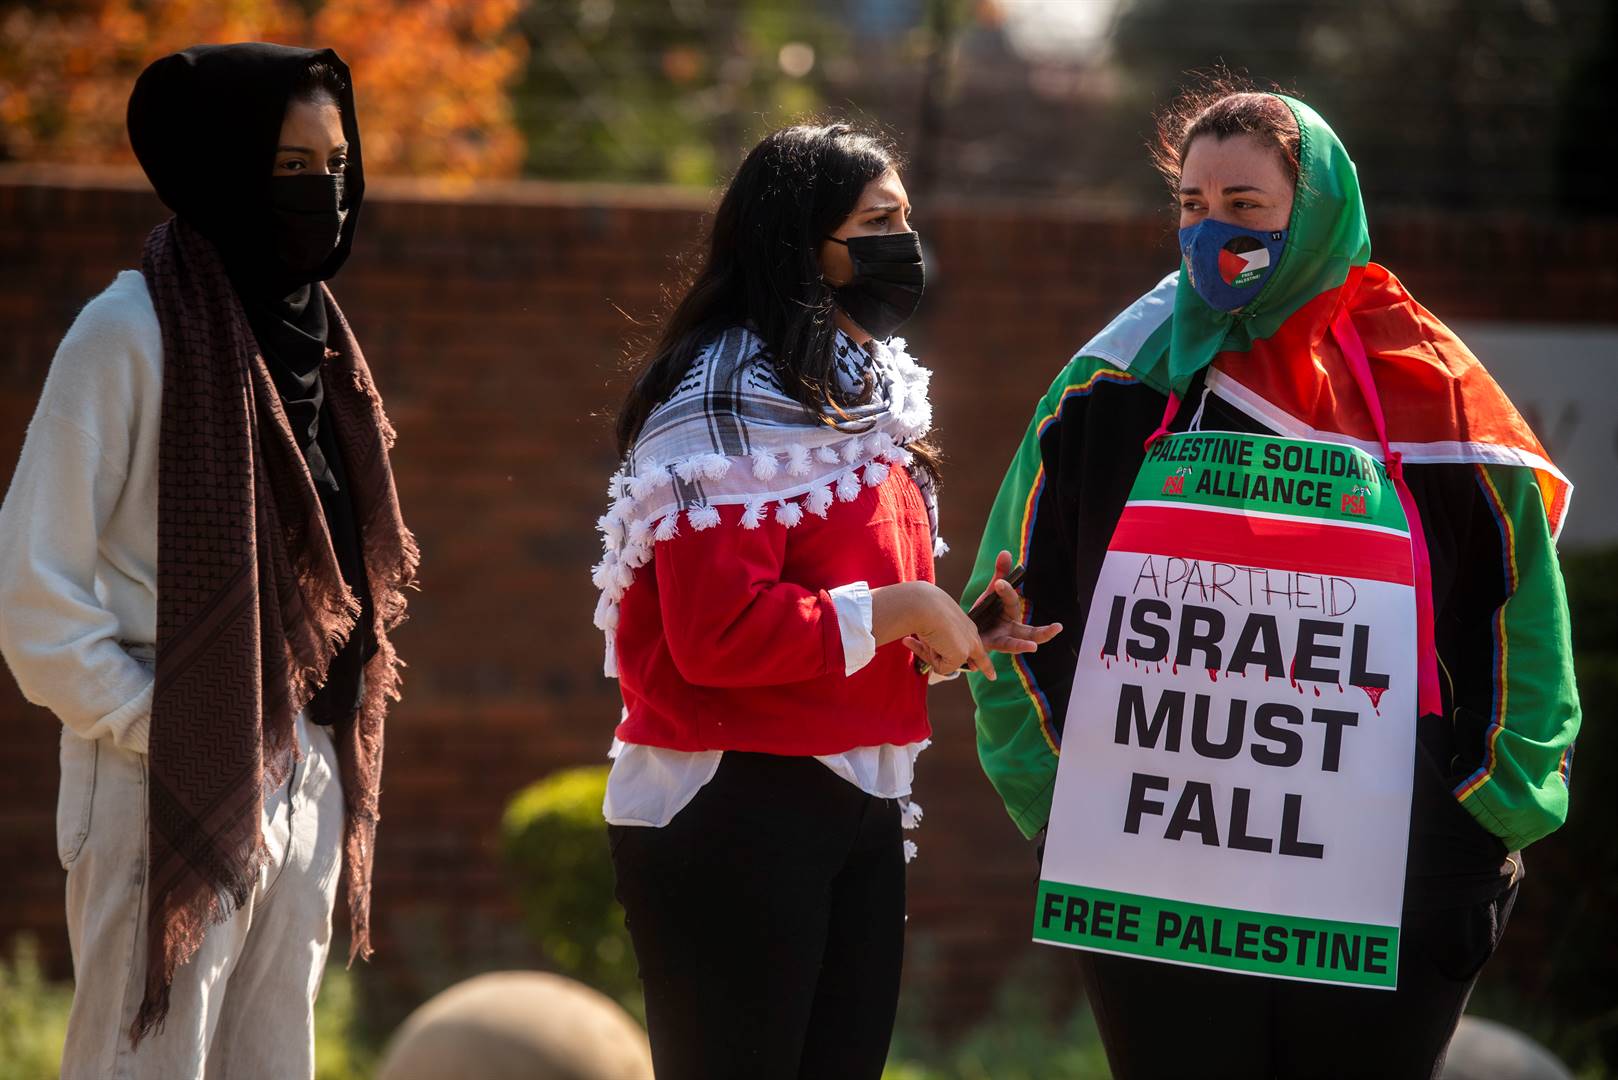 More than a 100 ANC members protested in solidarity with people of Palestine at the Israeli embassy in Pretoria. Photo: Gallo Images/Alet Pretorius/File